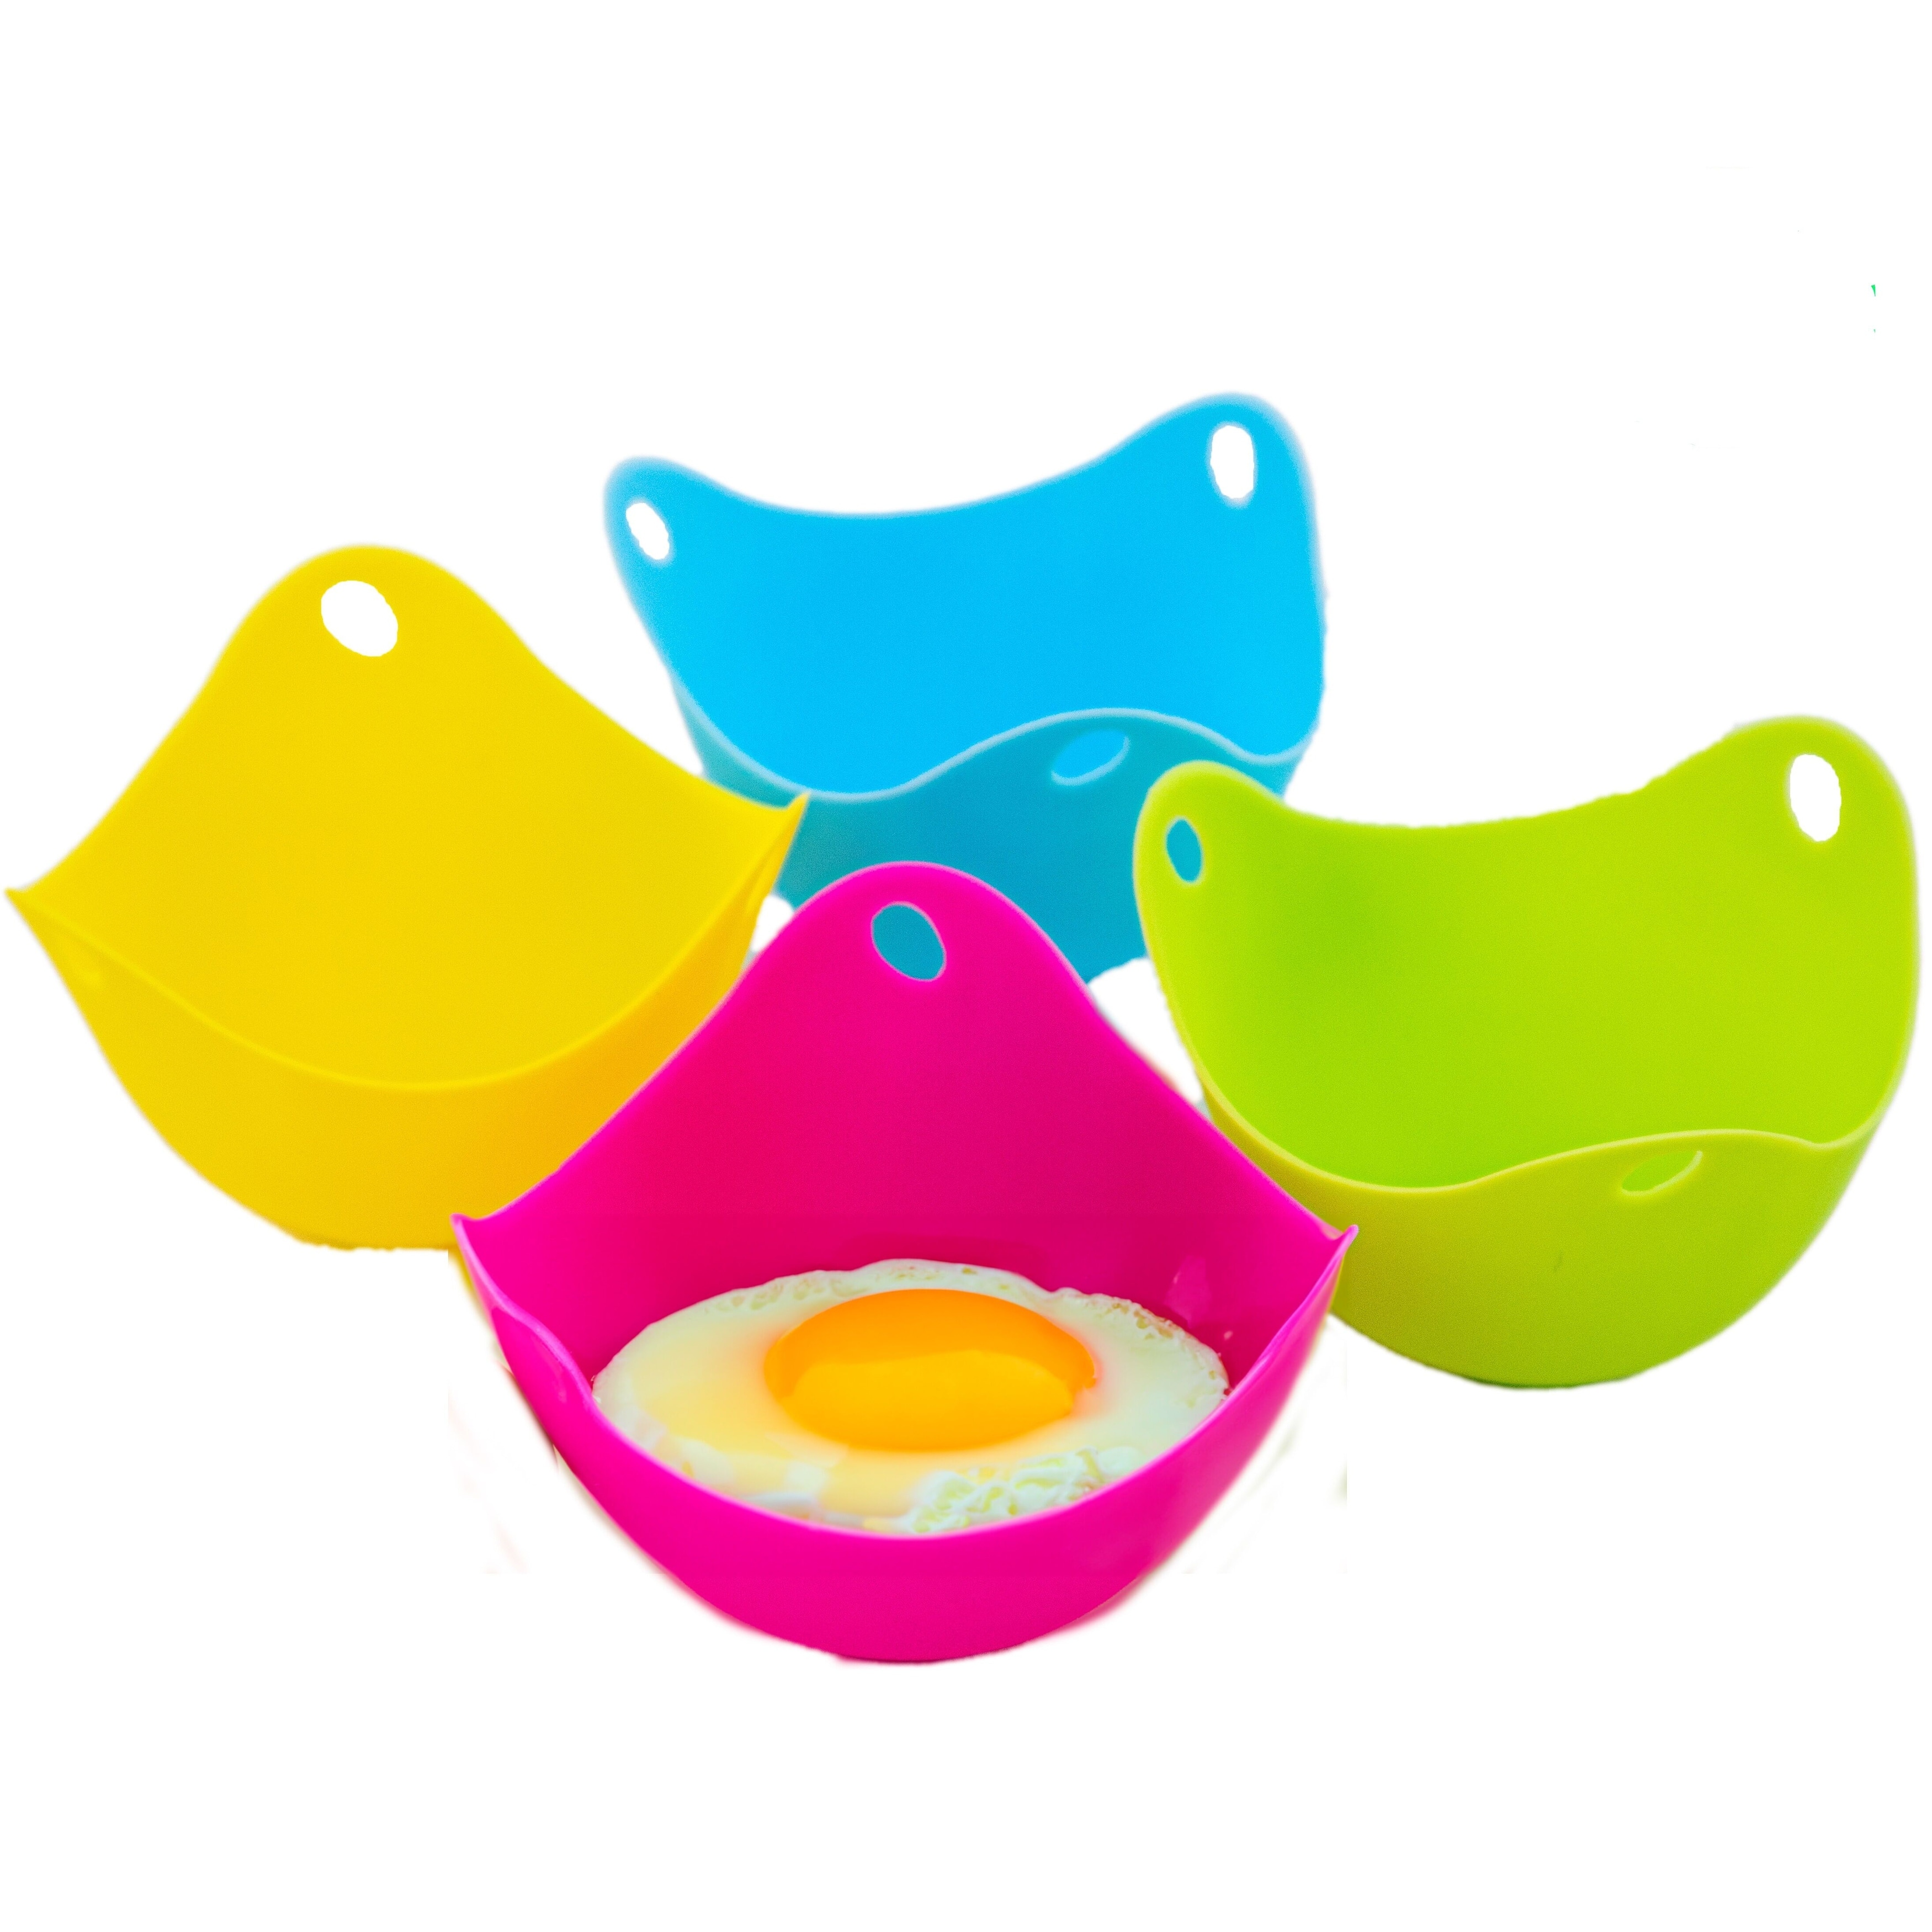 Silicone Egg Poacher Microwave Easy Poached Egg Maker Double Cups Kichen  Tools